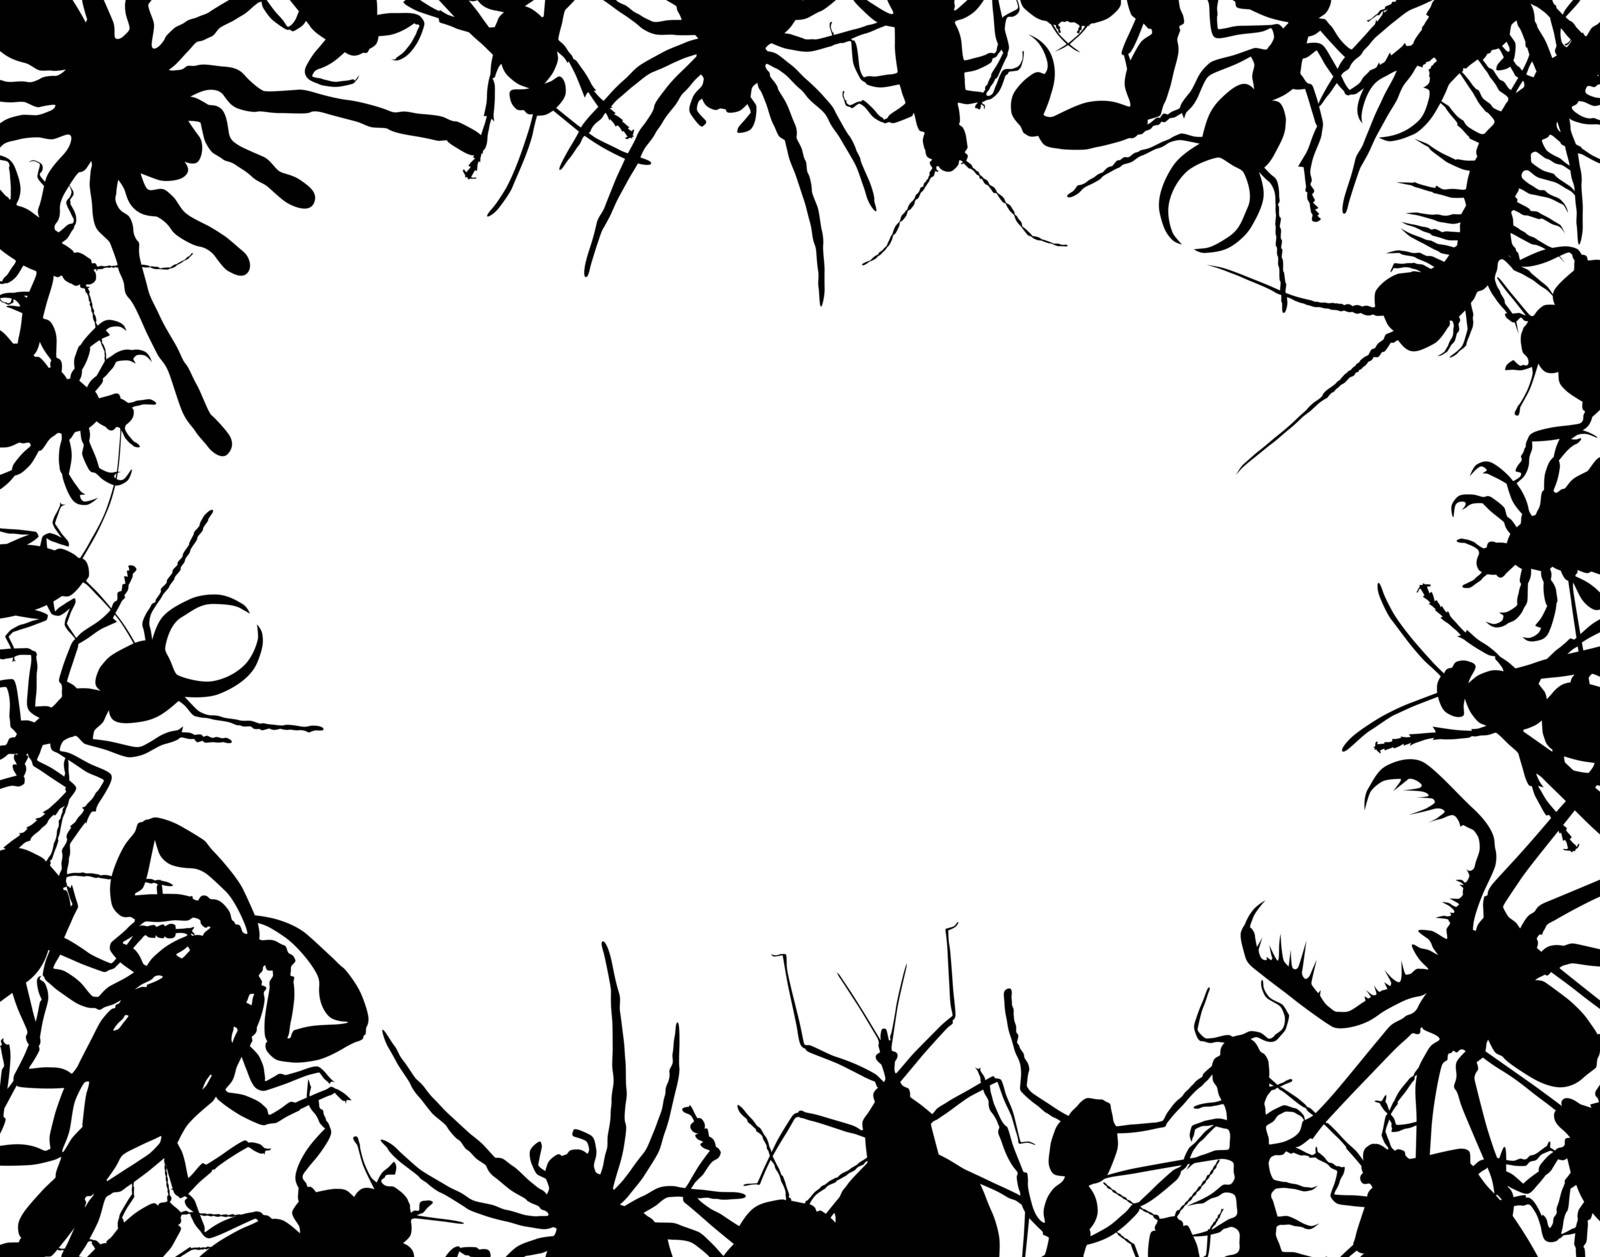 Border frame of editable vector outlines of insects and other invertebrates